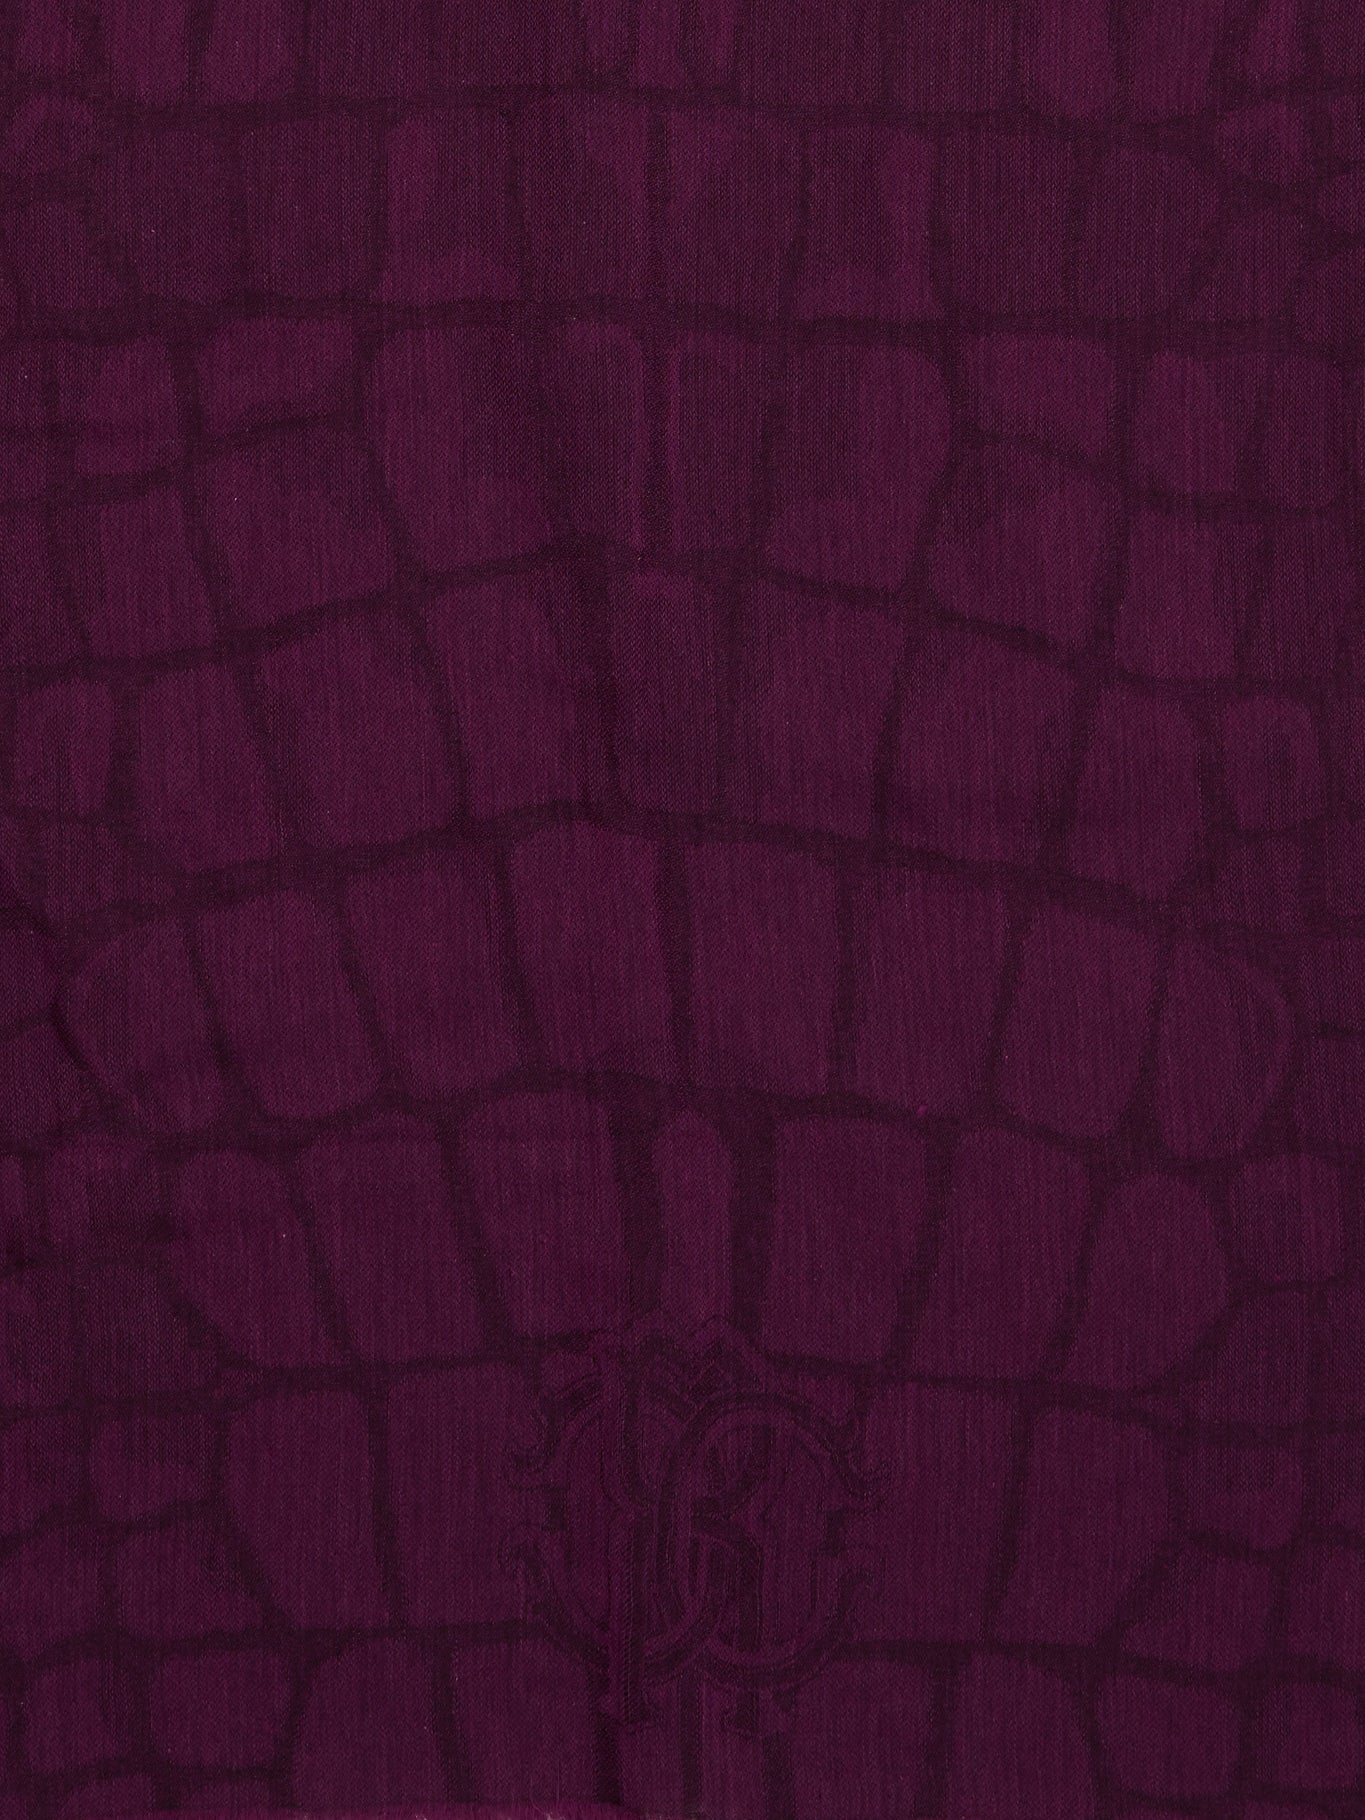 Wrap yourself in luxury with this stunning Burgundy Snake Print Scarf by Roberto Cavalli. Made from the finest materials, this scarf features a bold and captivating design that will elevate any outfit. Stand out from the crowd and exude confidence and style with this must-have accessory.